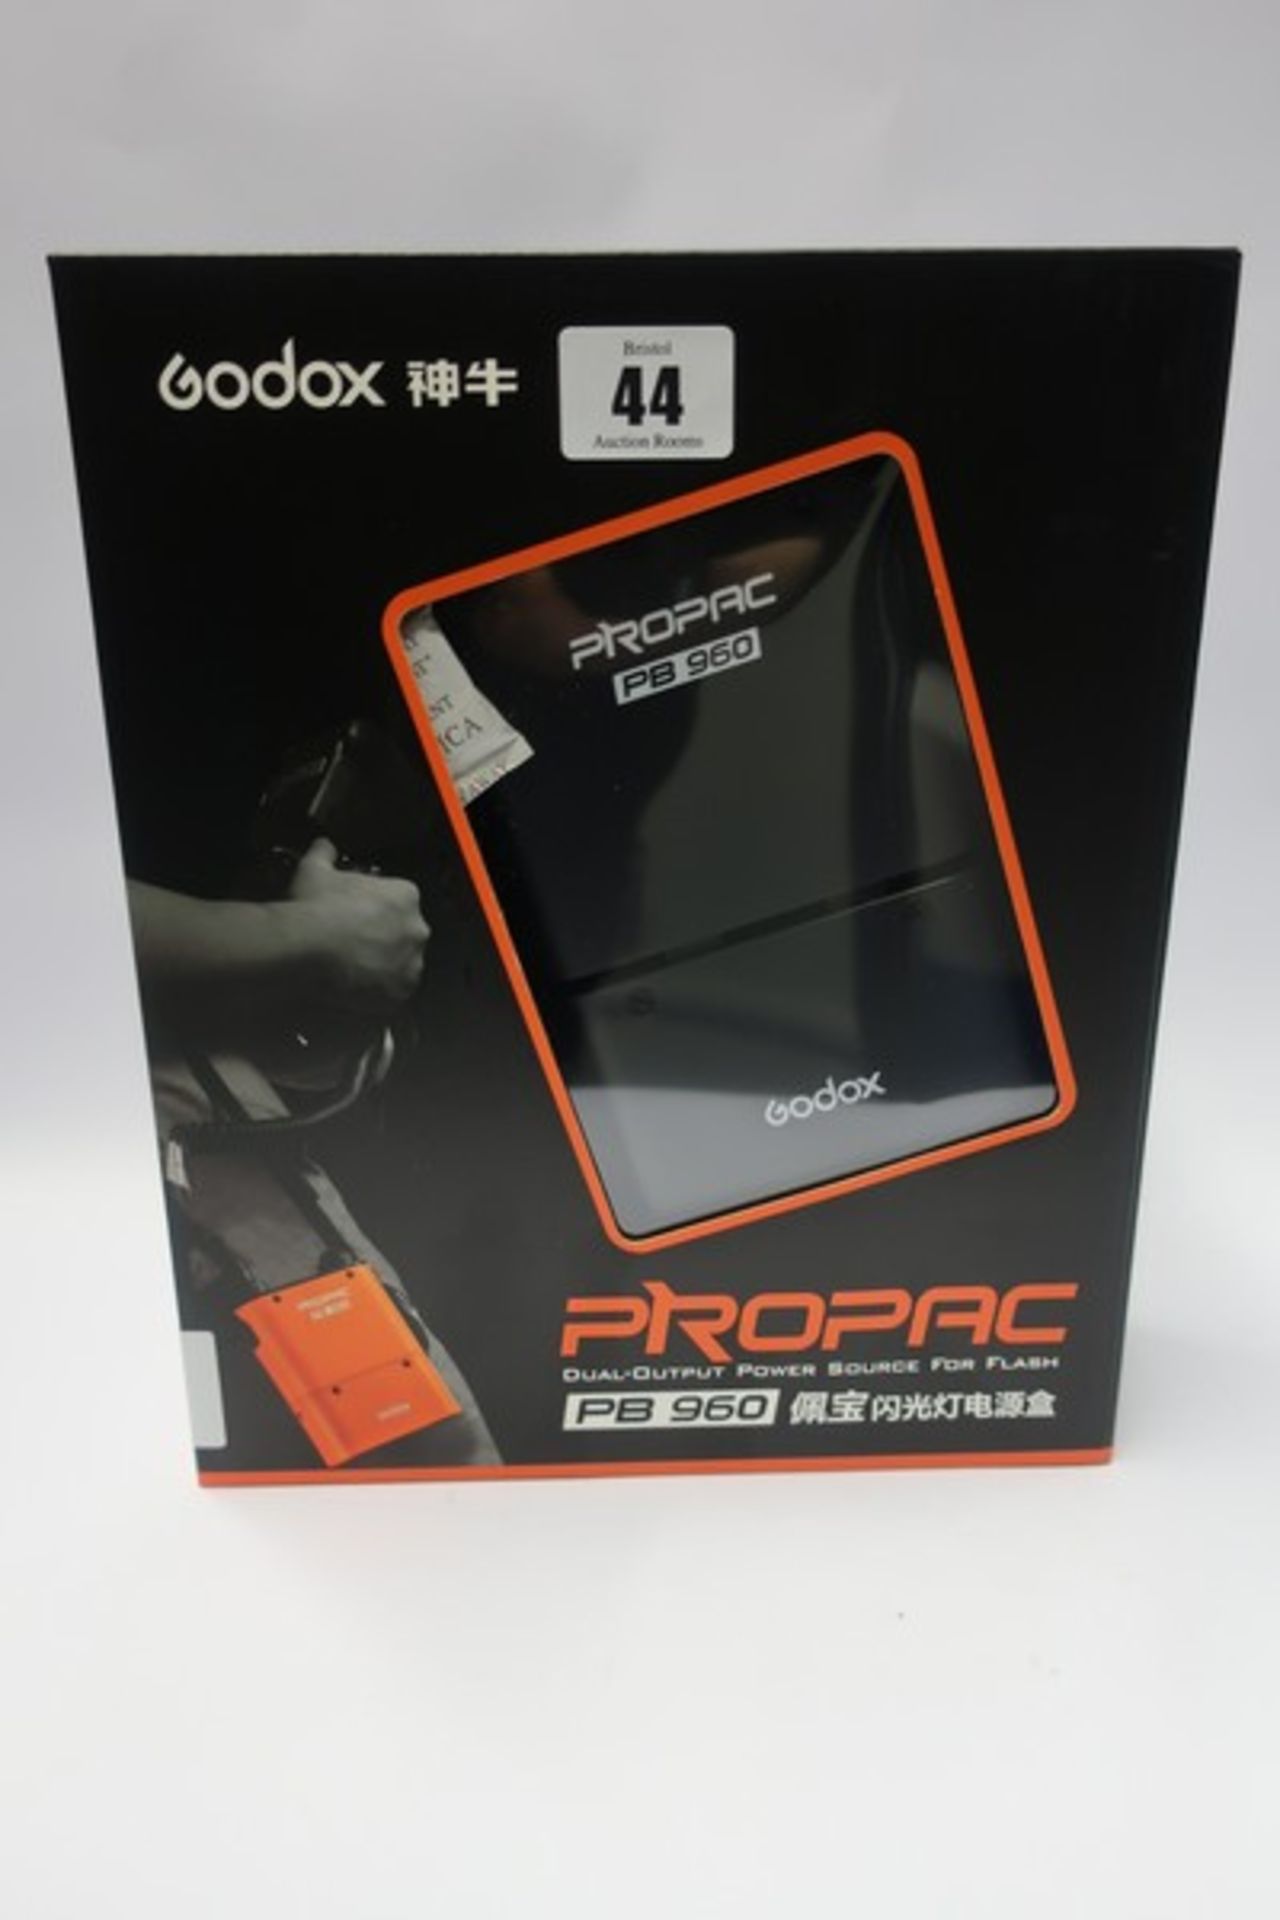 Two boxed as new, Godox Propac PB960 4500mAh Lithium Battery Flash Power Pack's with Dual Output.